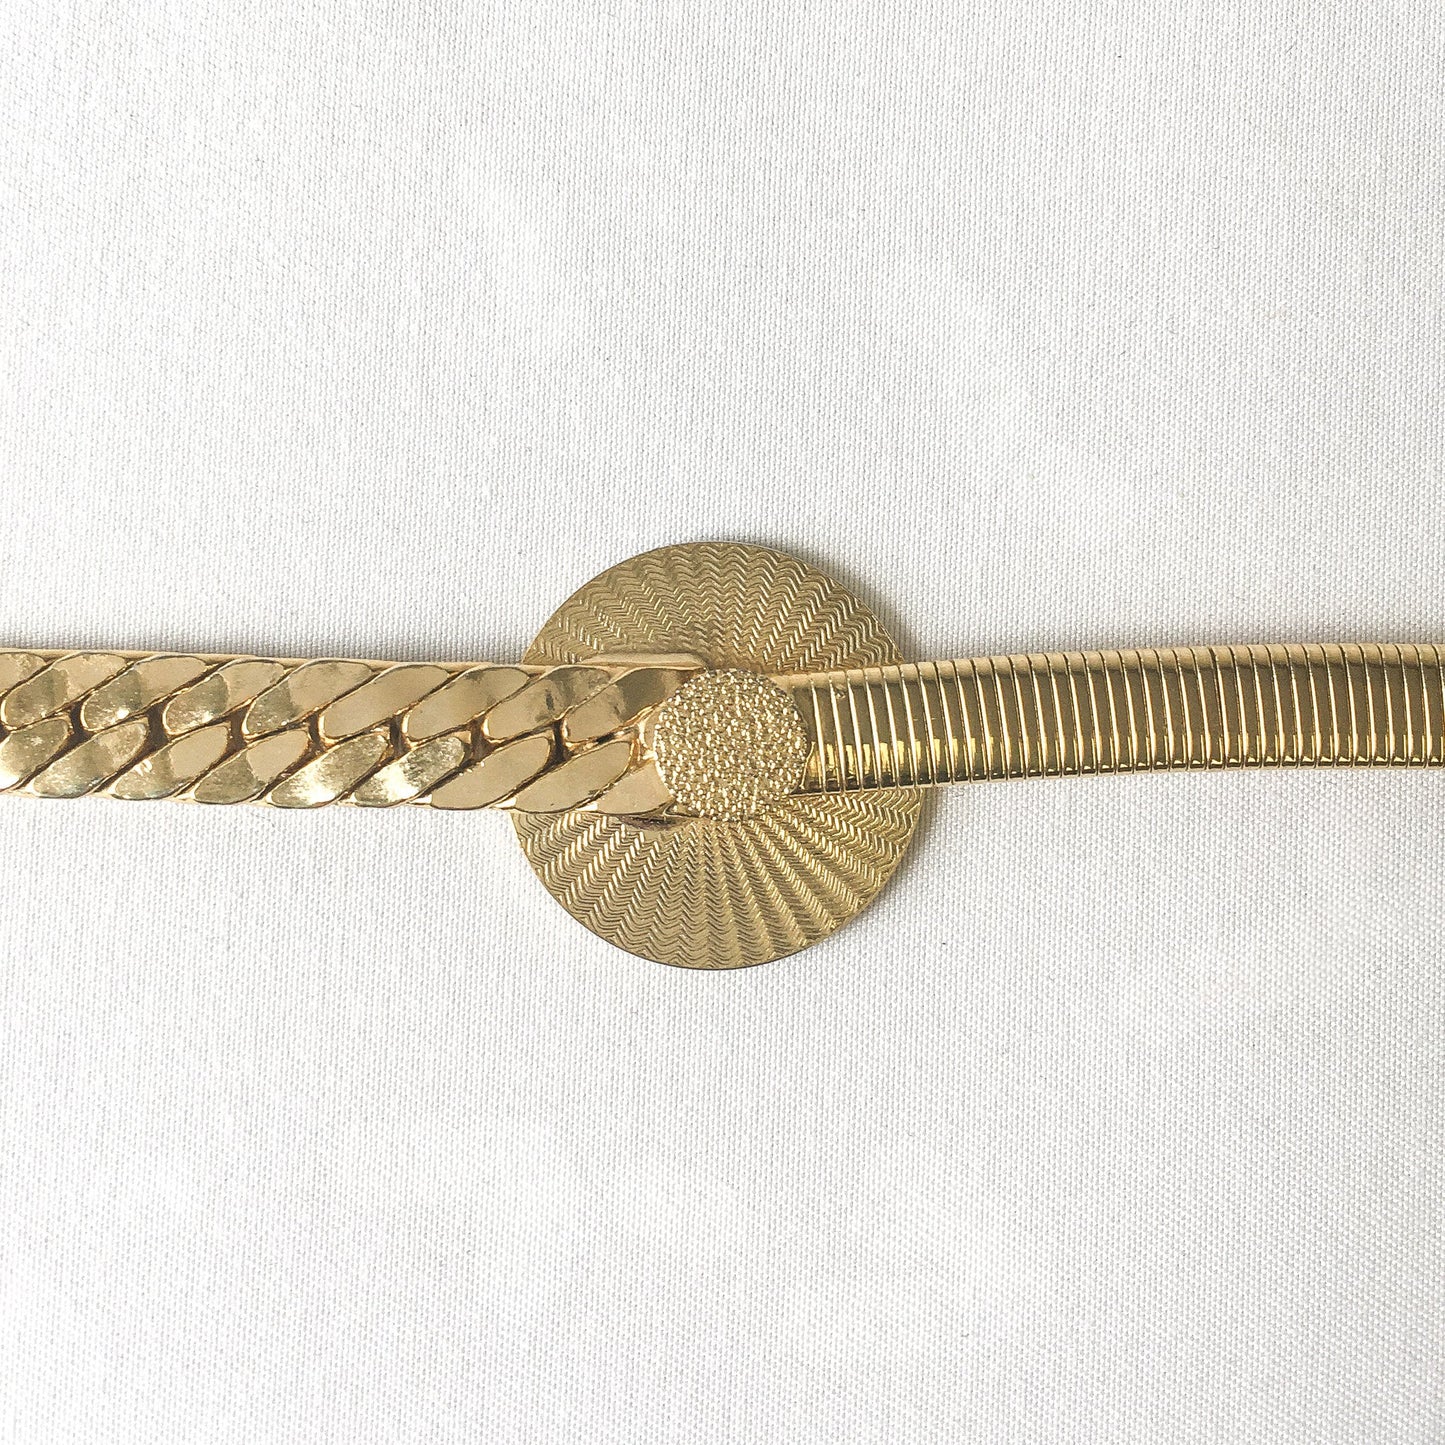 Vintage Gold Toned Metal Expandable Belt with Grecian Archer Detail